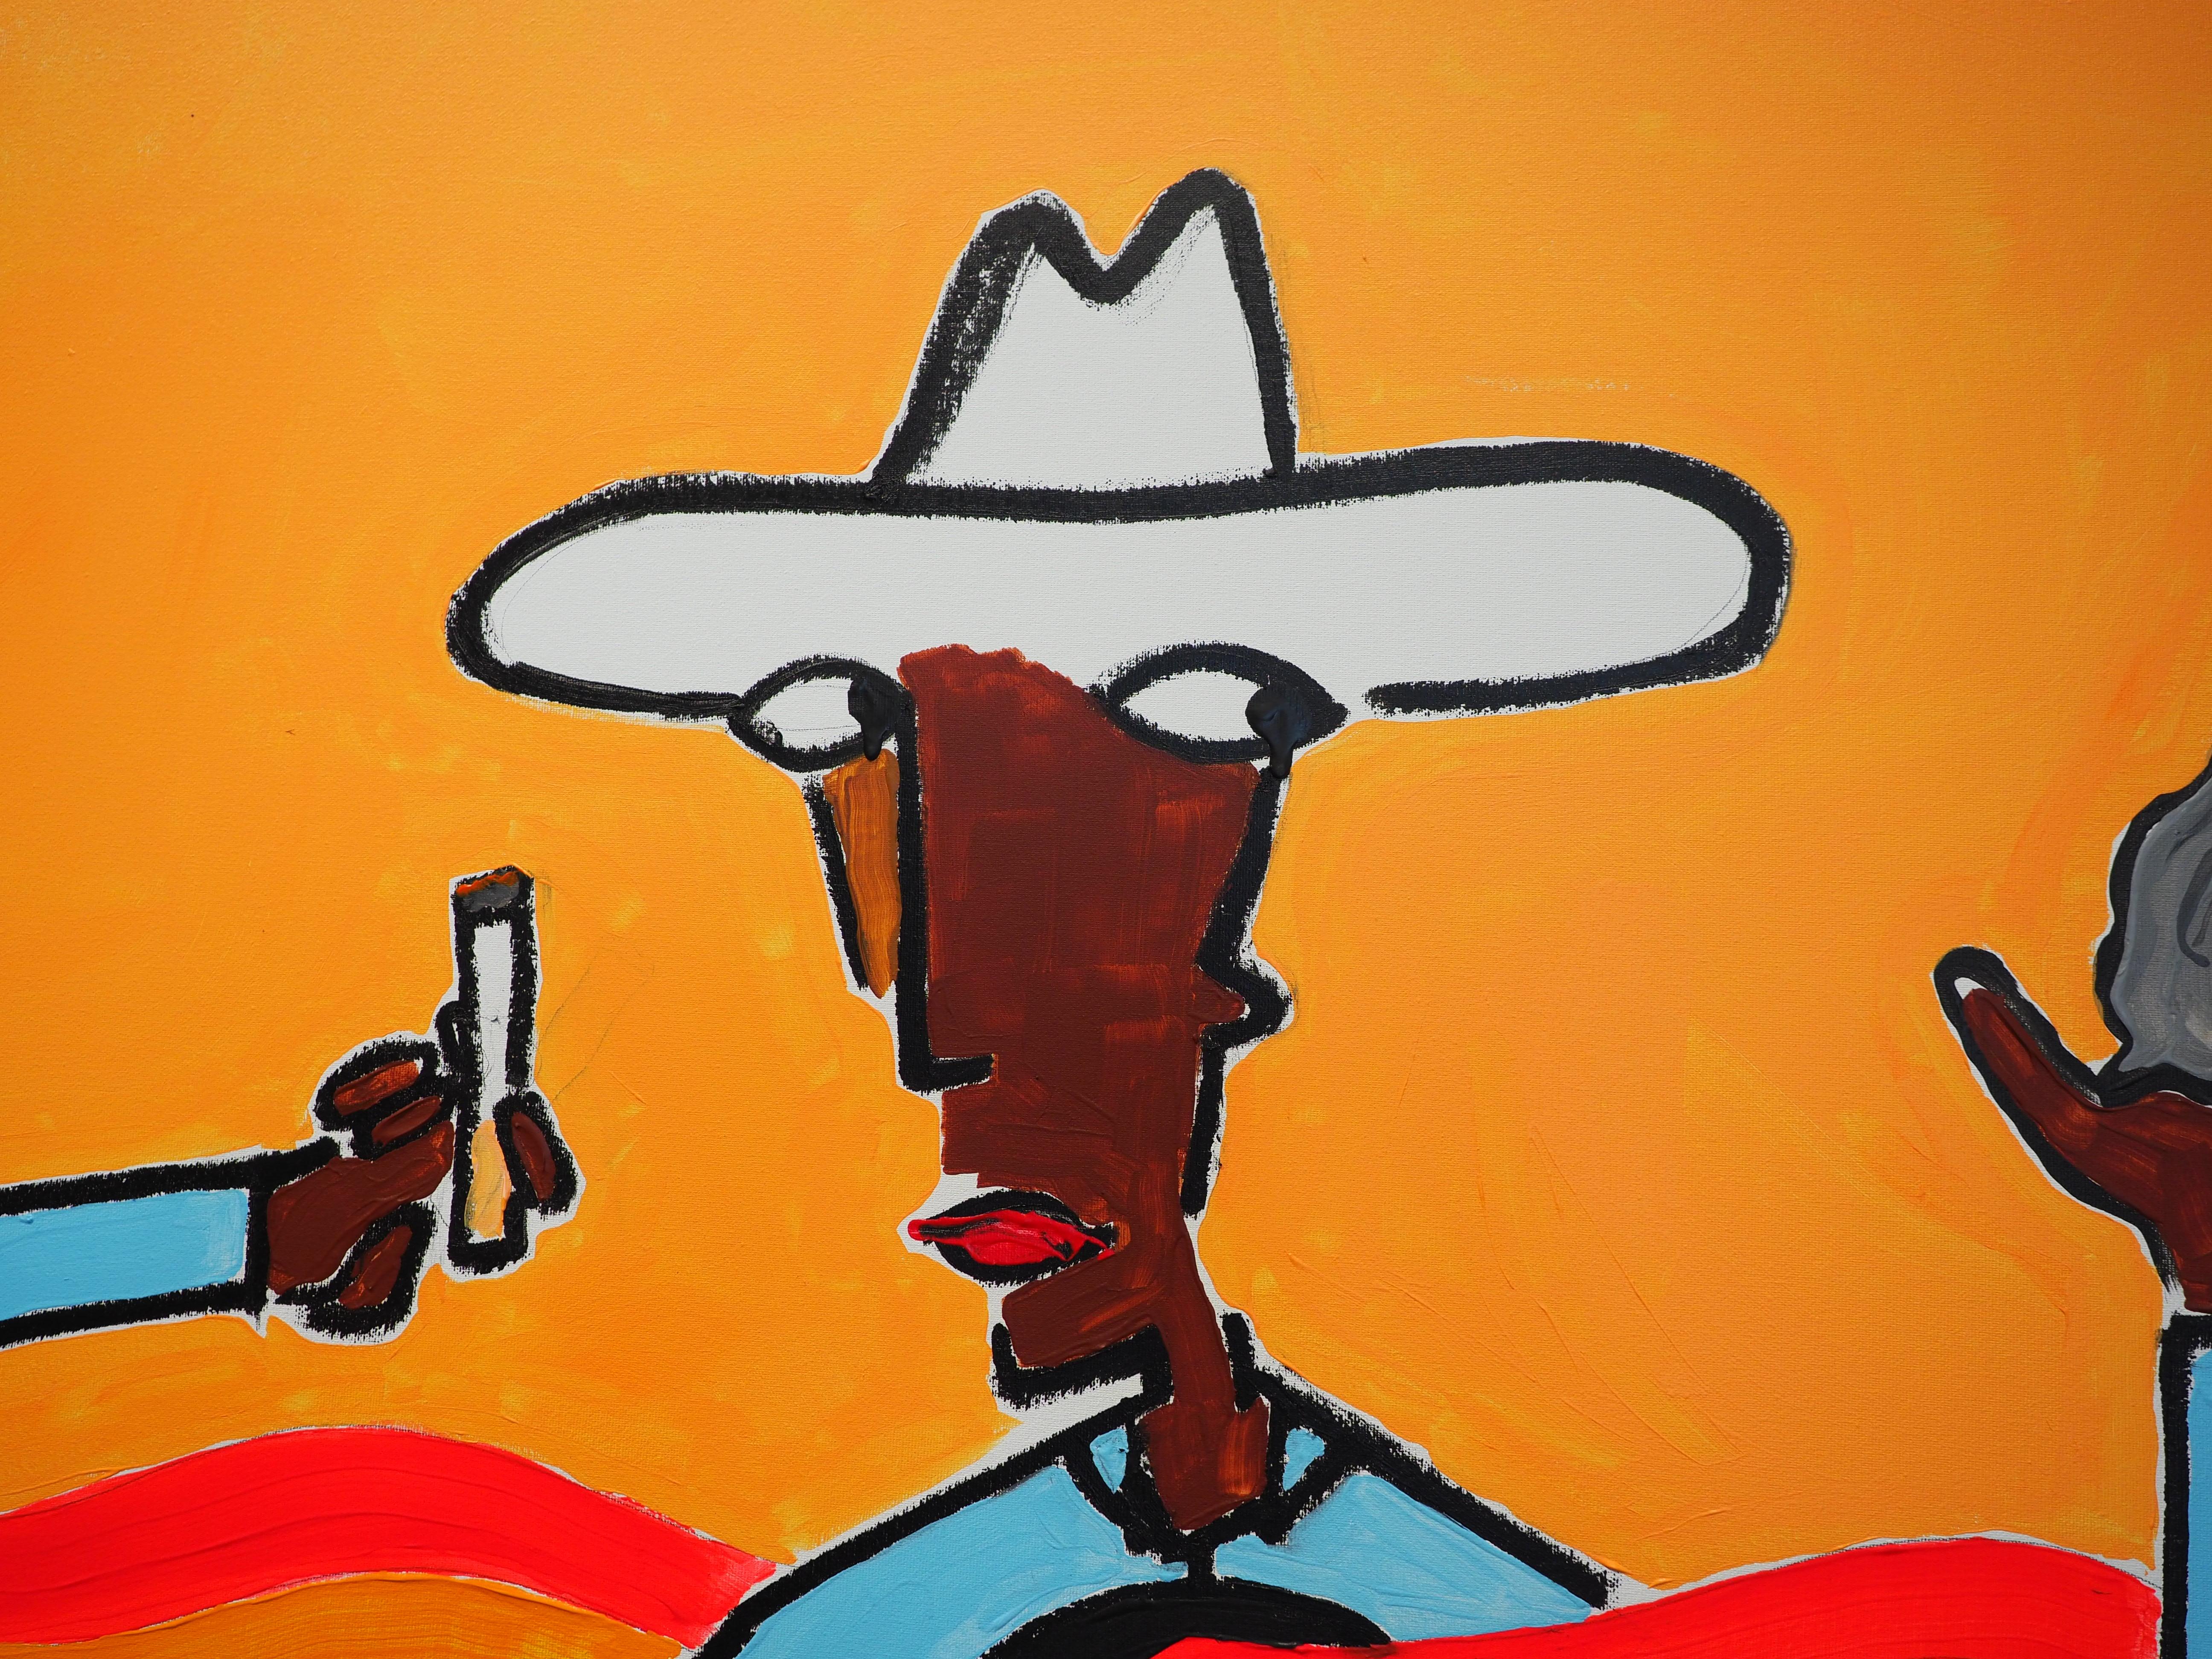 Black cowboy portrays a minimalistic cowboy character in a desert scene holding a cigarette in his right hand and a pistol in his left. The figure stands in front of an orange monochromatic sky as a rainbow wave streams through his chest, suggesting